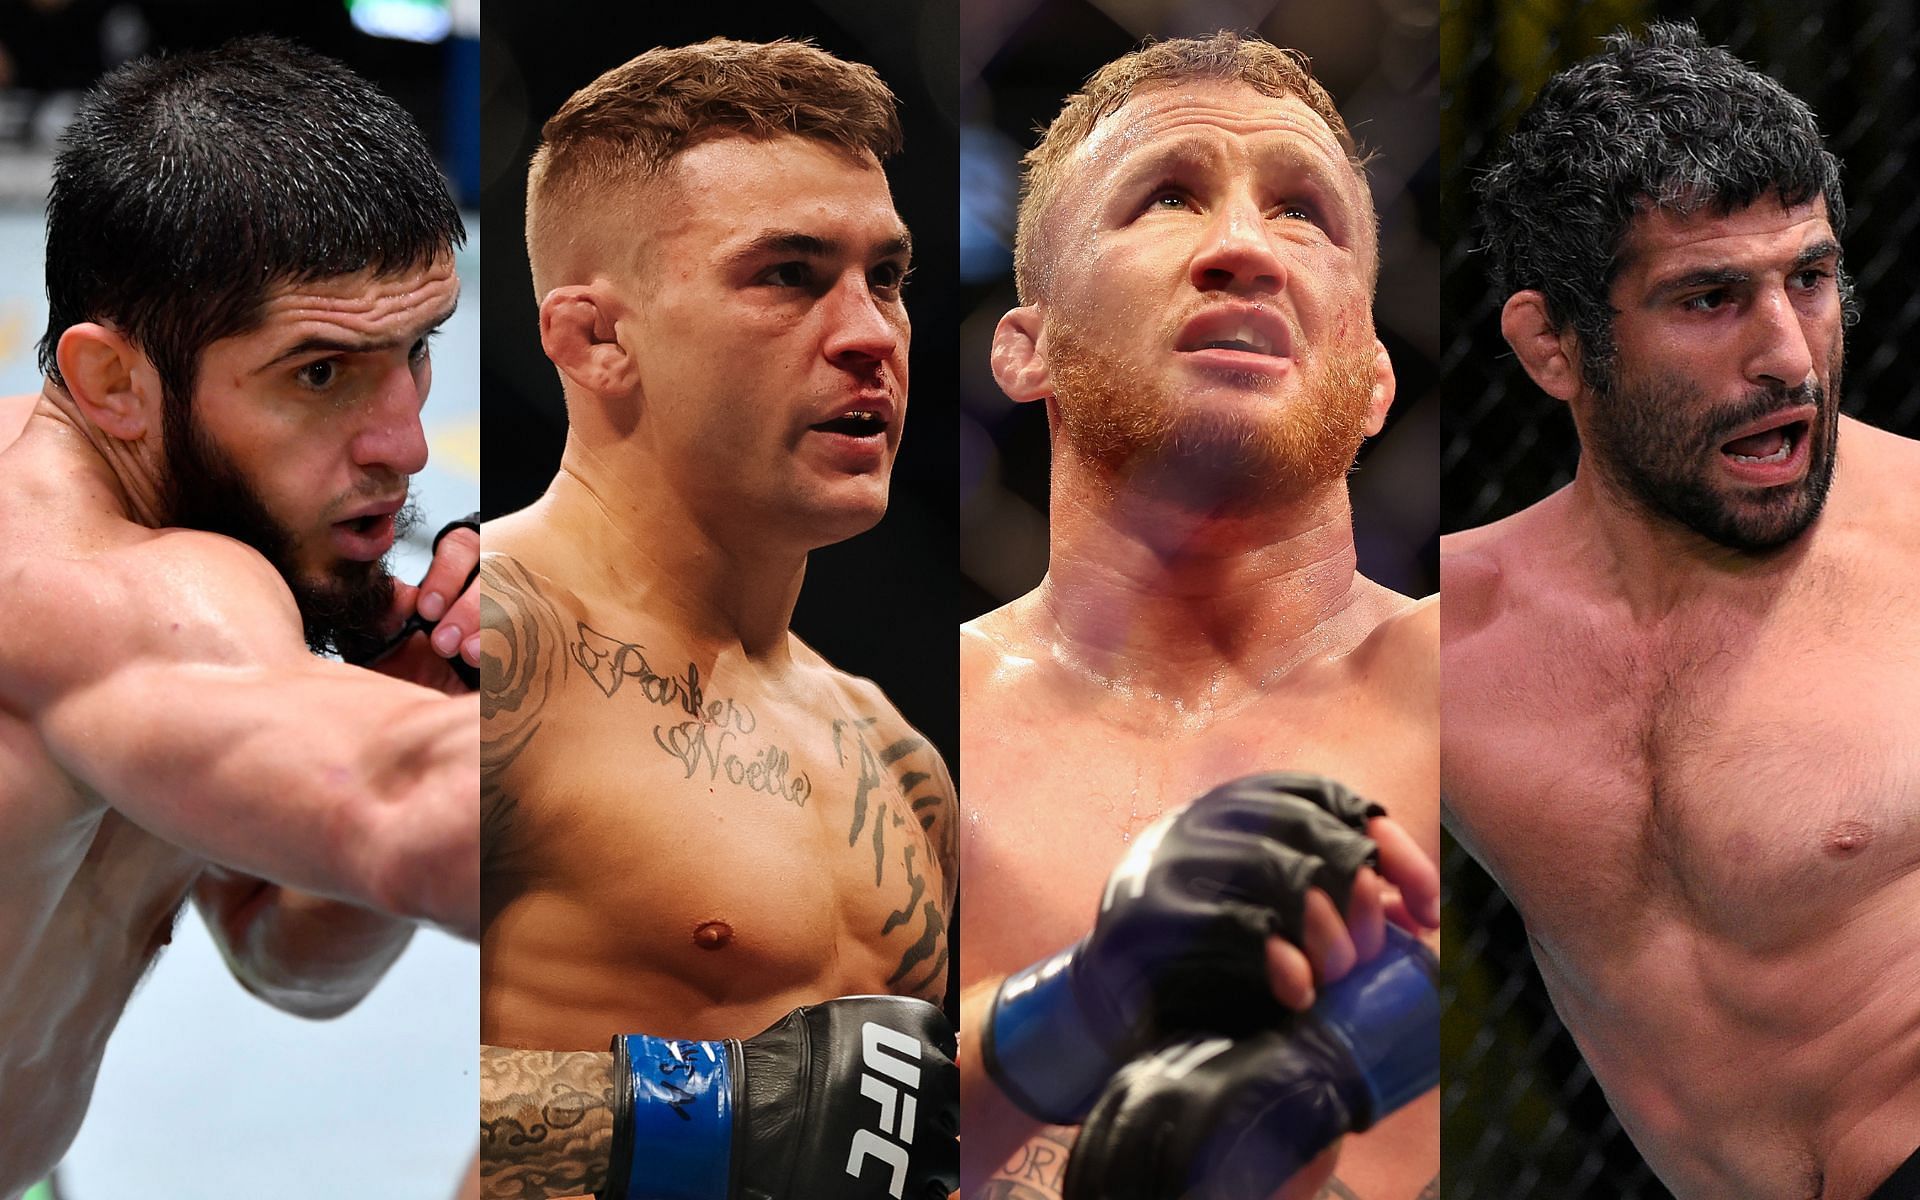 Islam Makhachev (Left); Dustin Poirier (Second from left); Justin Gaethje (Second from right); Beneil Dariush (Right)